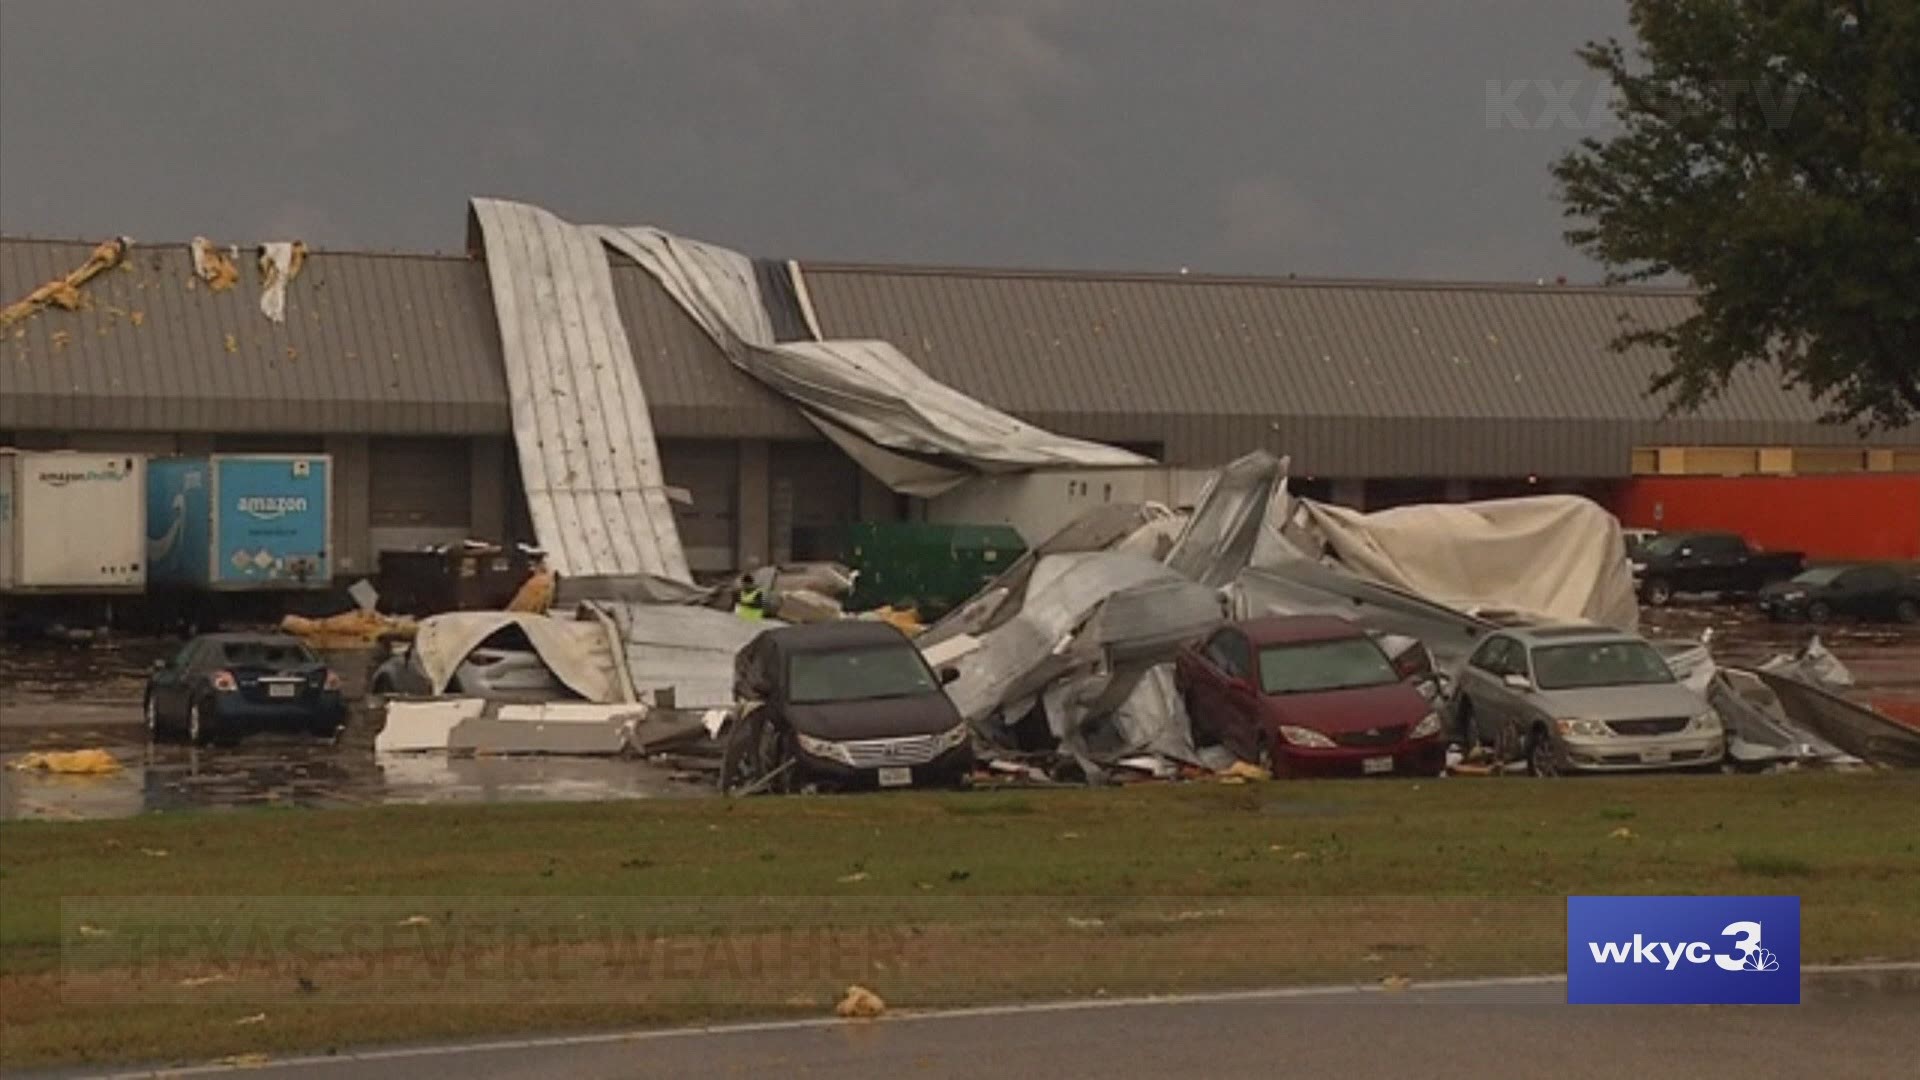 1 injured in Texas storms; small airplanes flip at airport